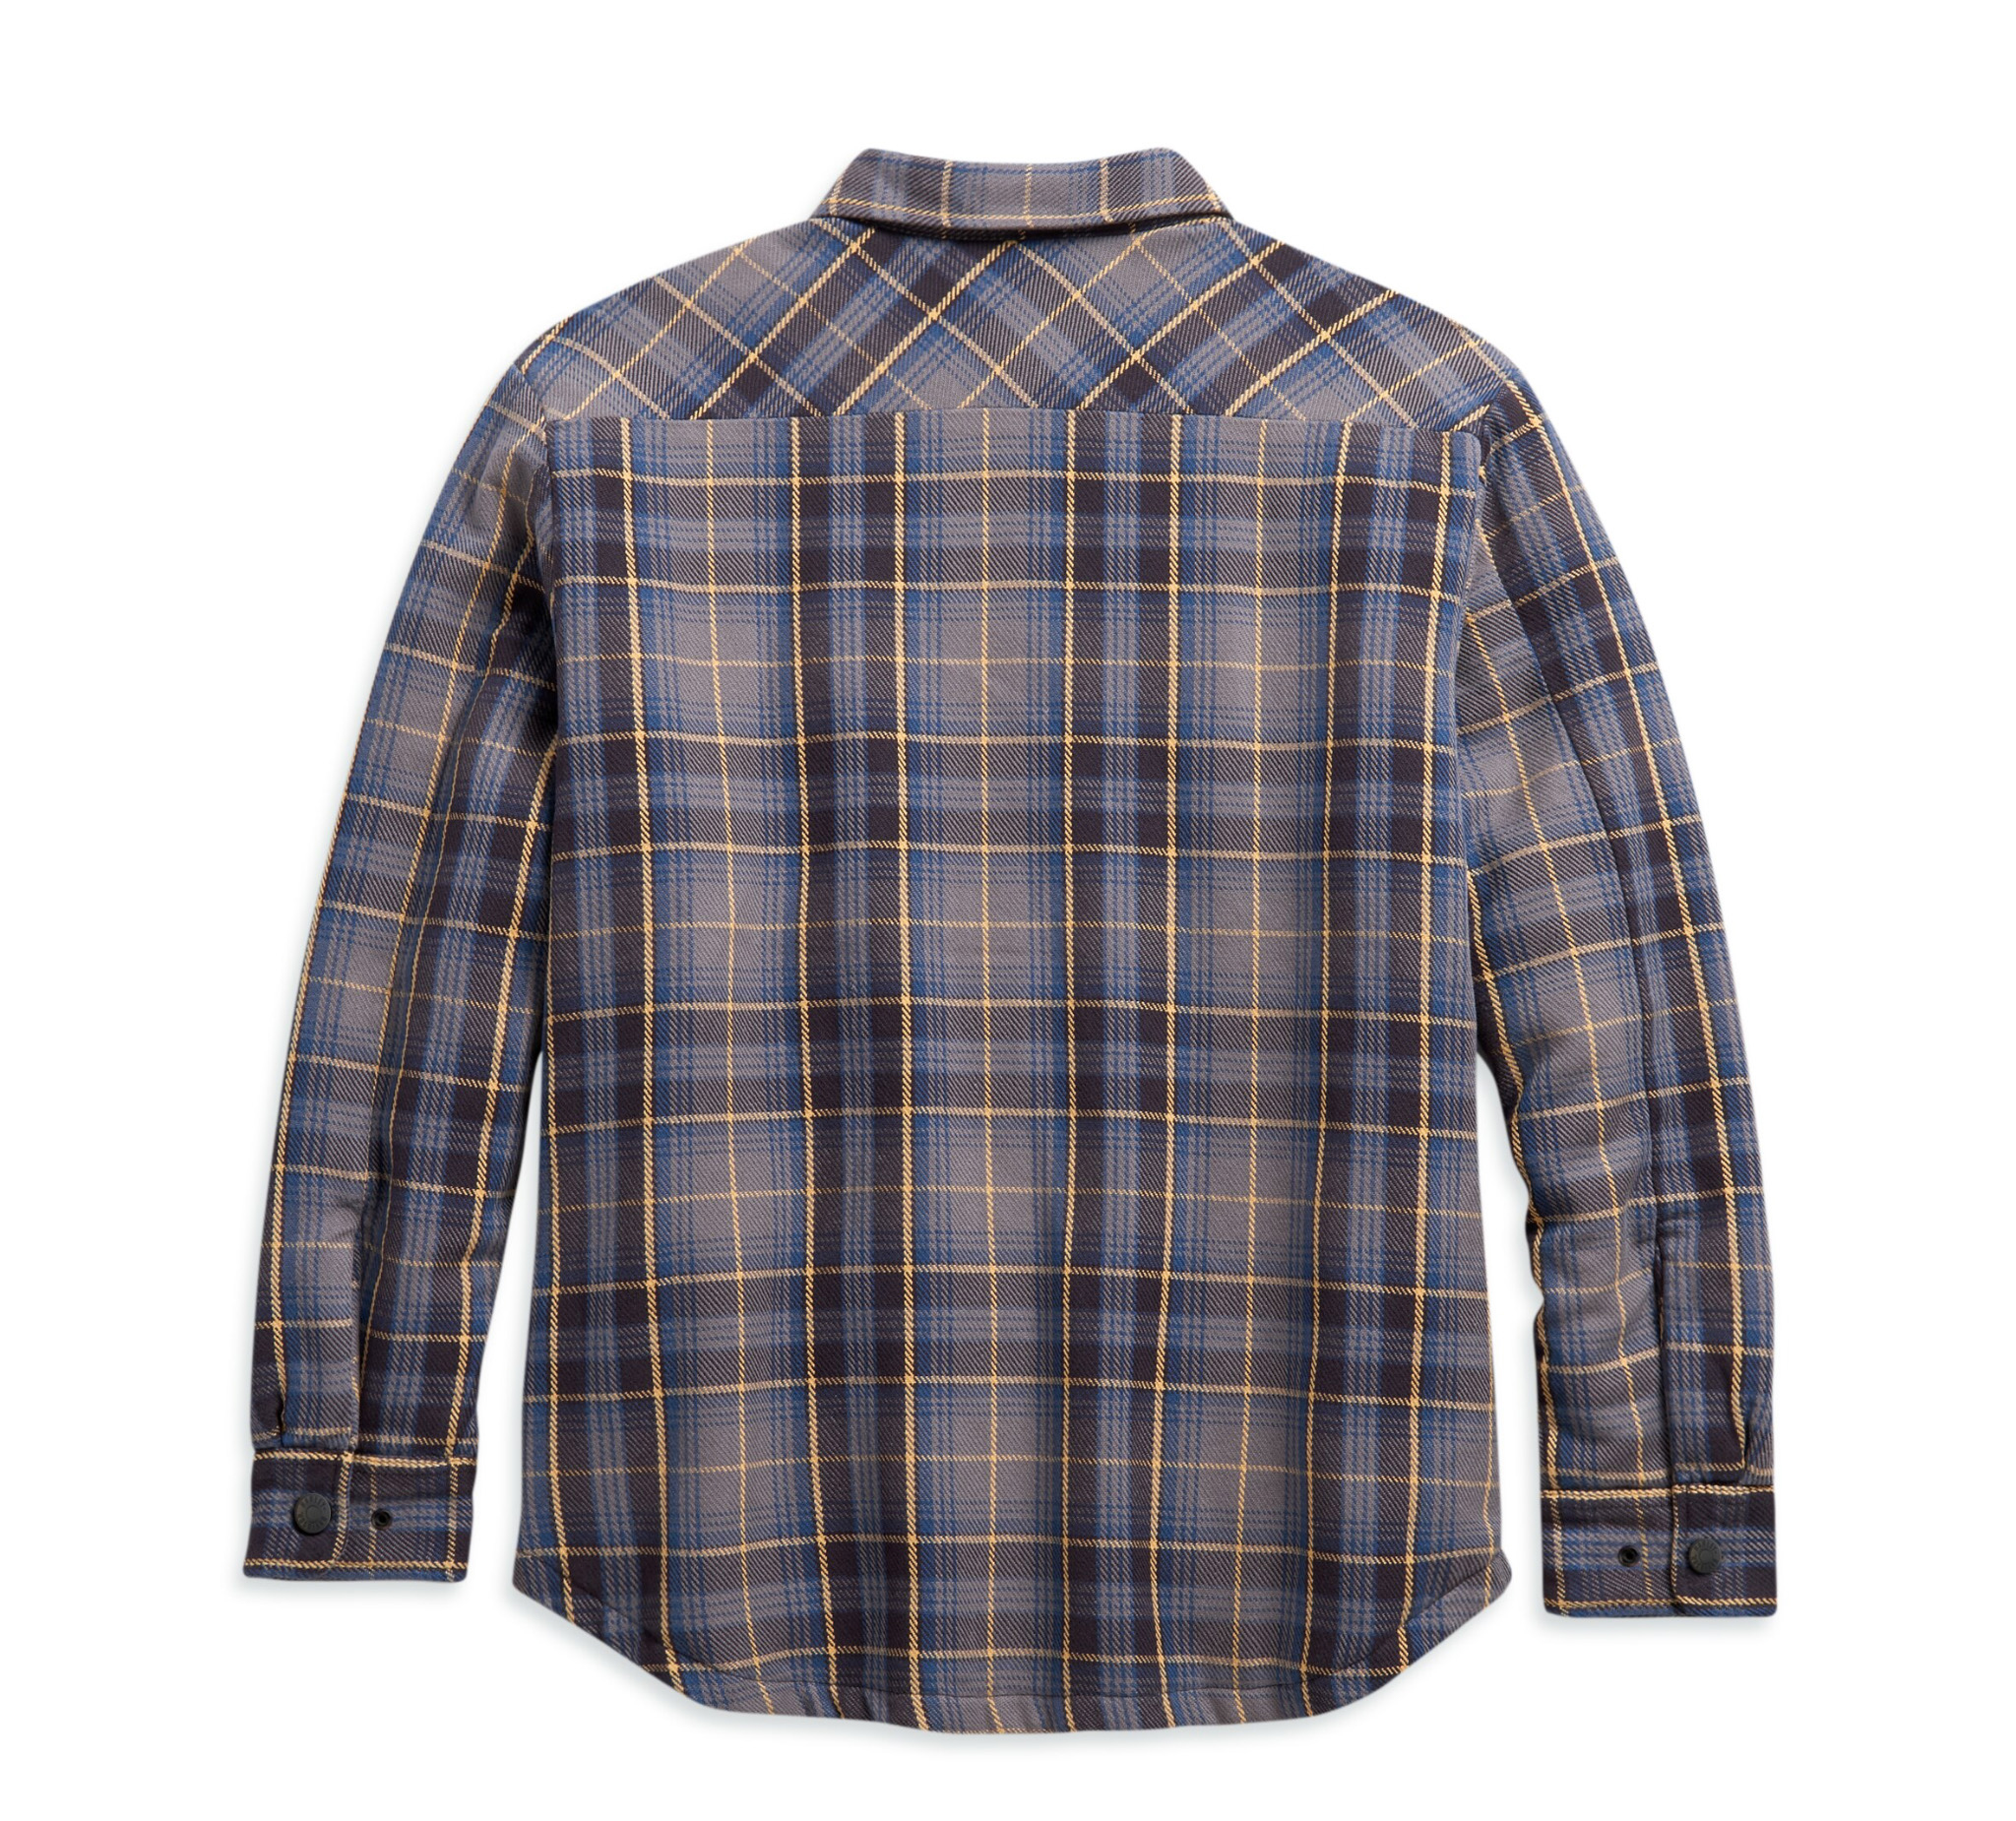 Men's Quilted Lining Plaid Shirt Jacket 